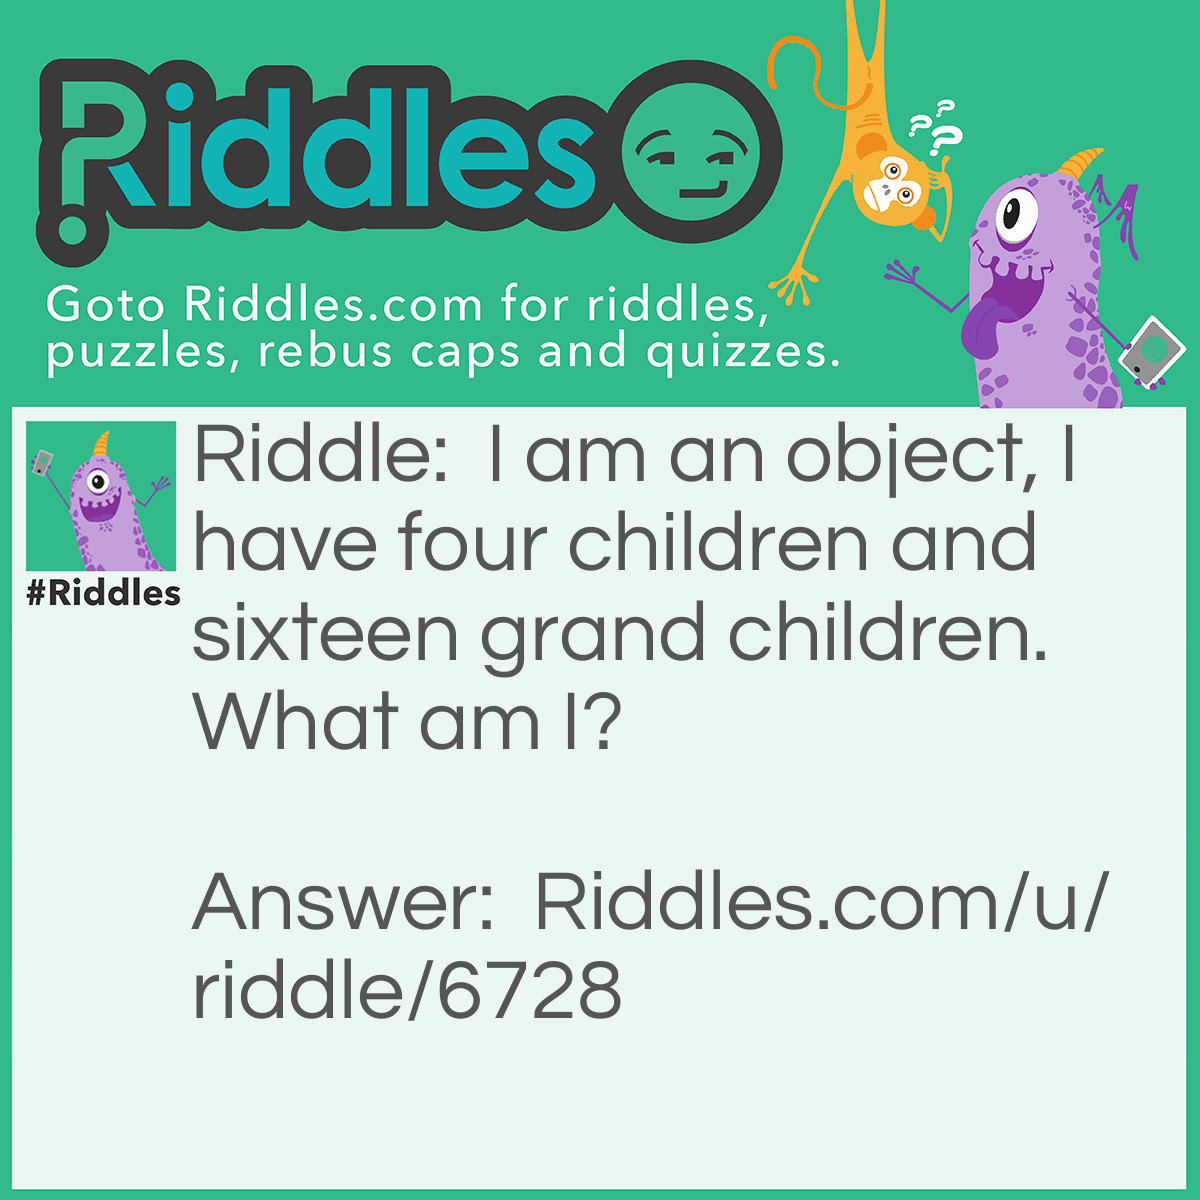 Riddle: I am an object, I have four children and sixteen grand children. What am I? Answer: Ludo game.